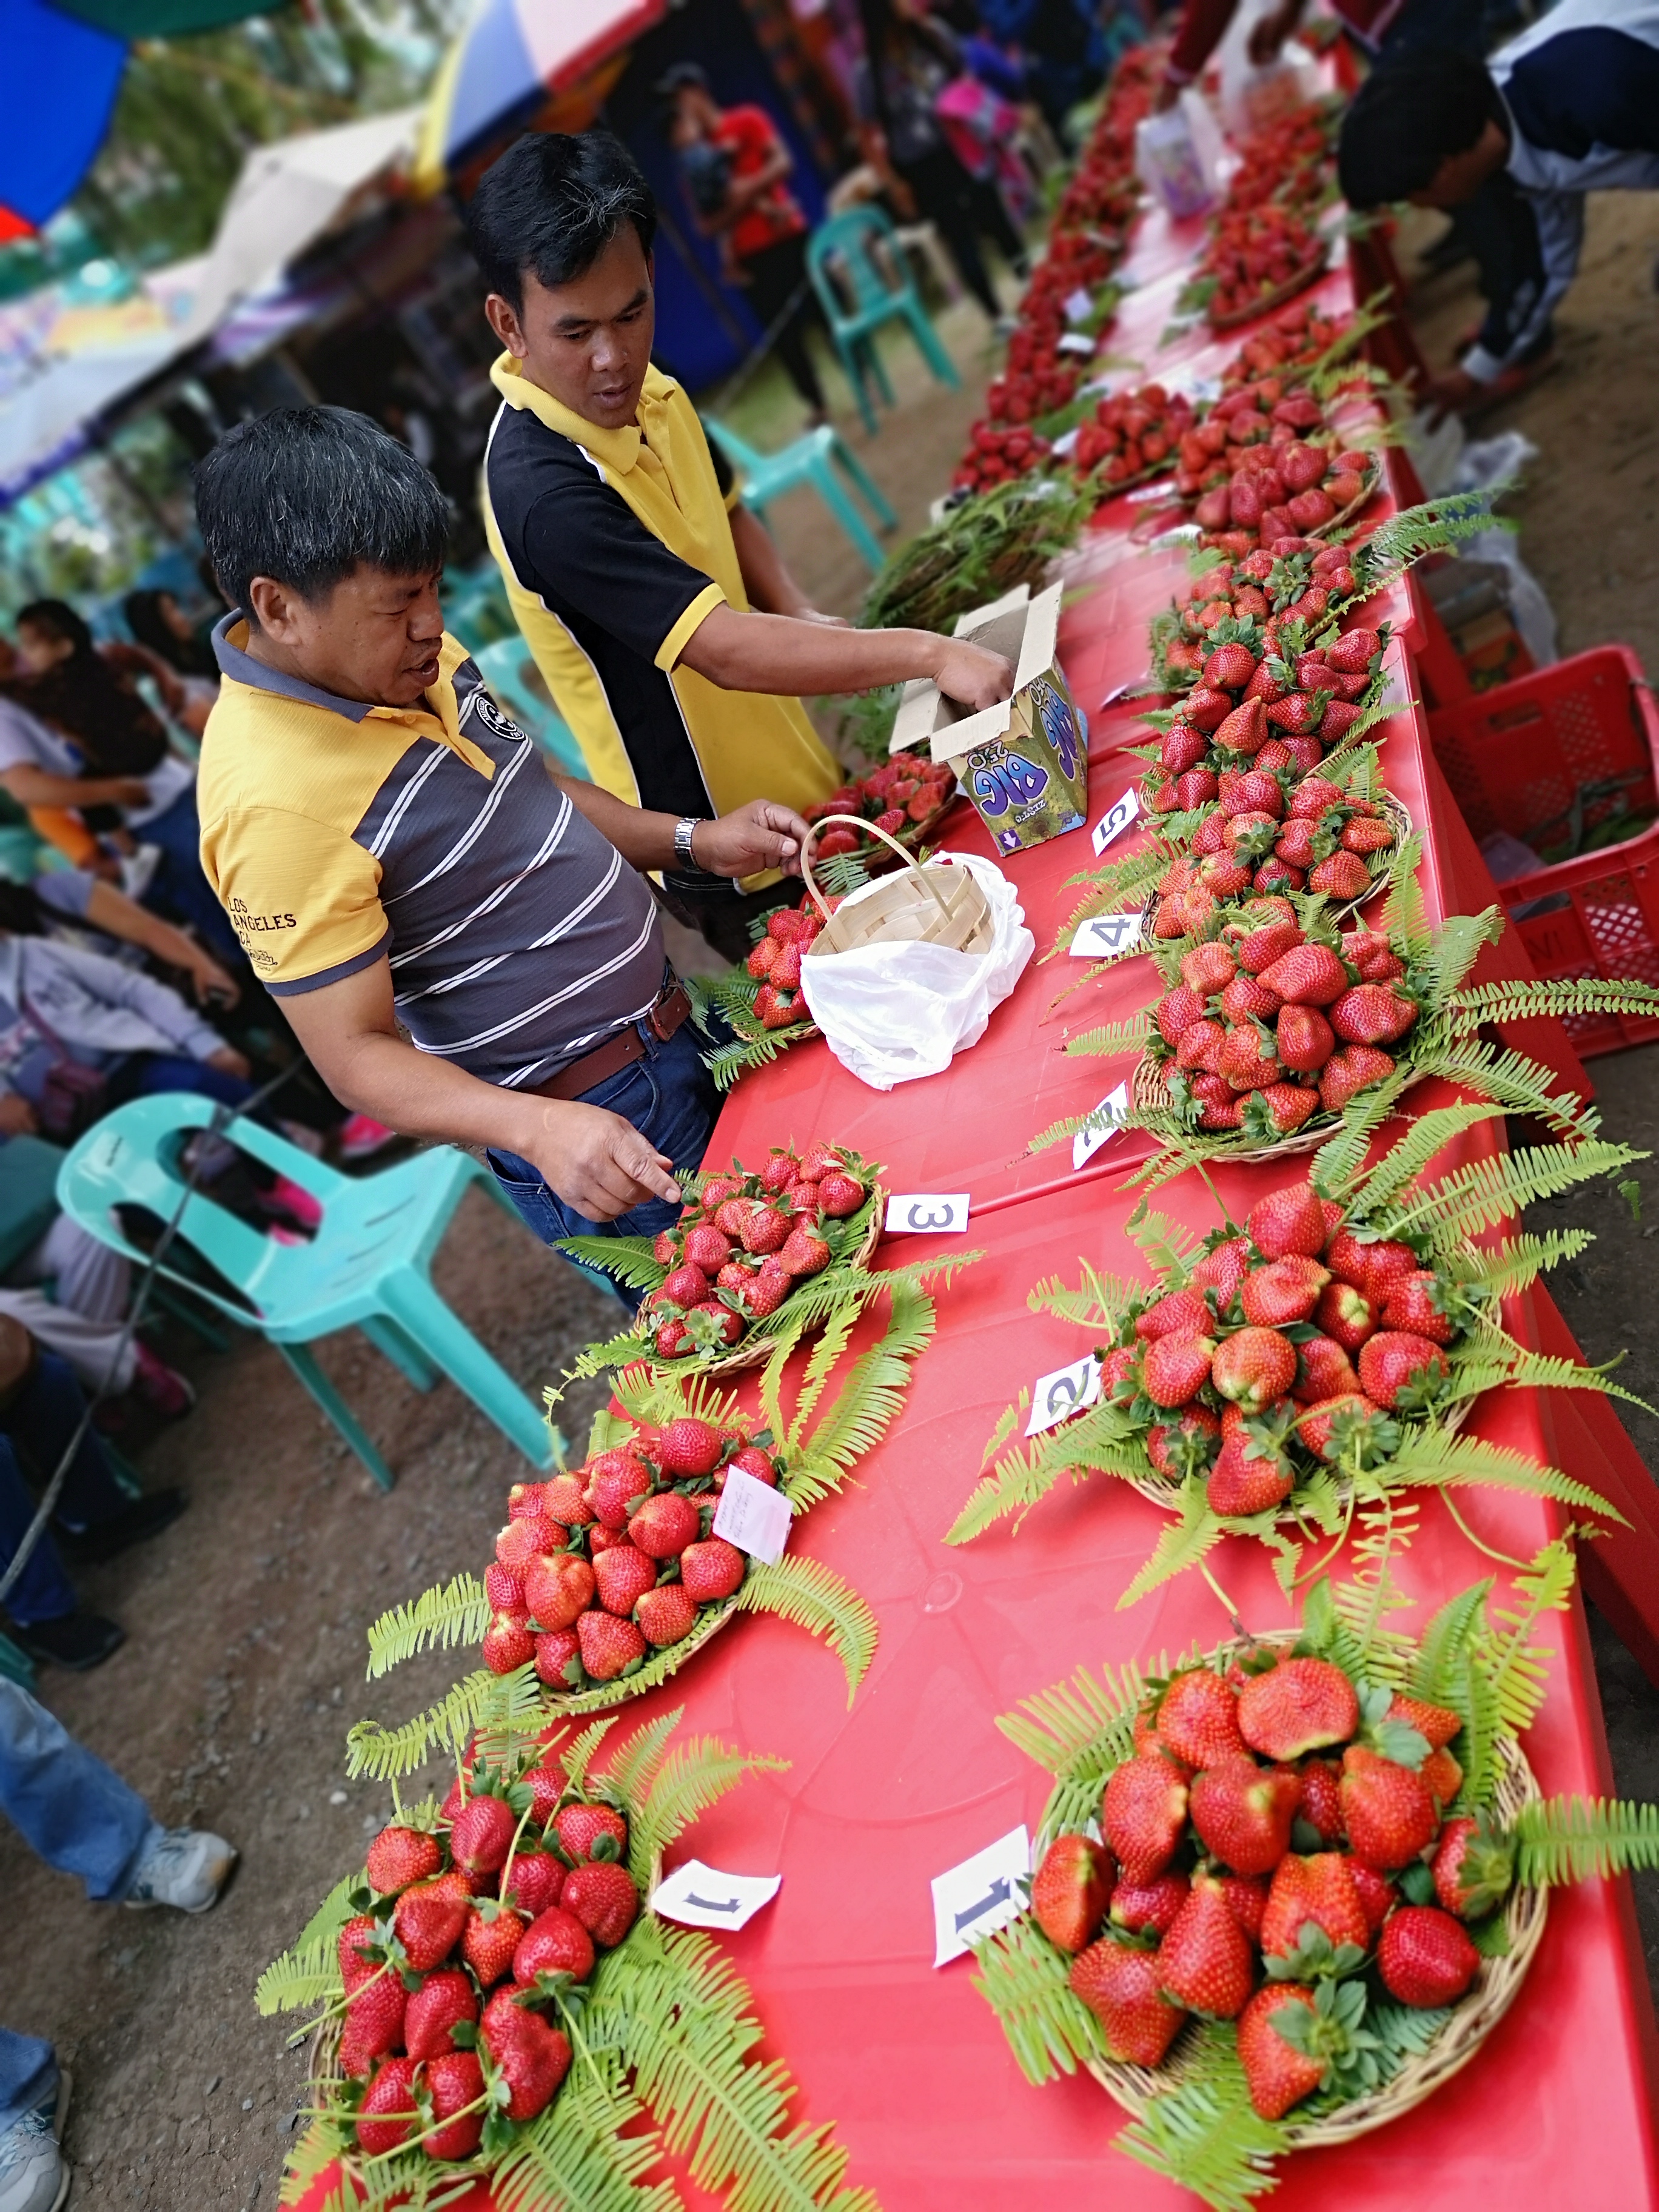 After flowerfest, tourists drawn to Strawberry Fest in Benguet capital